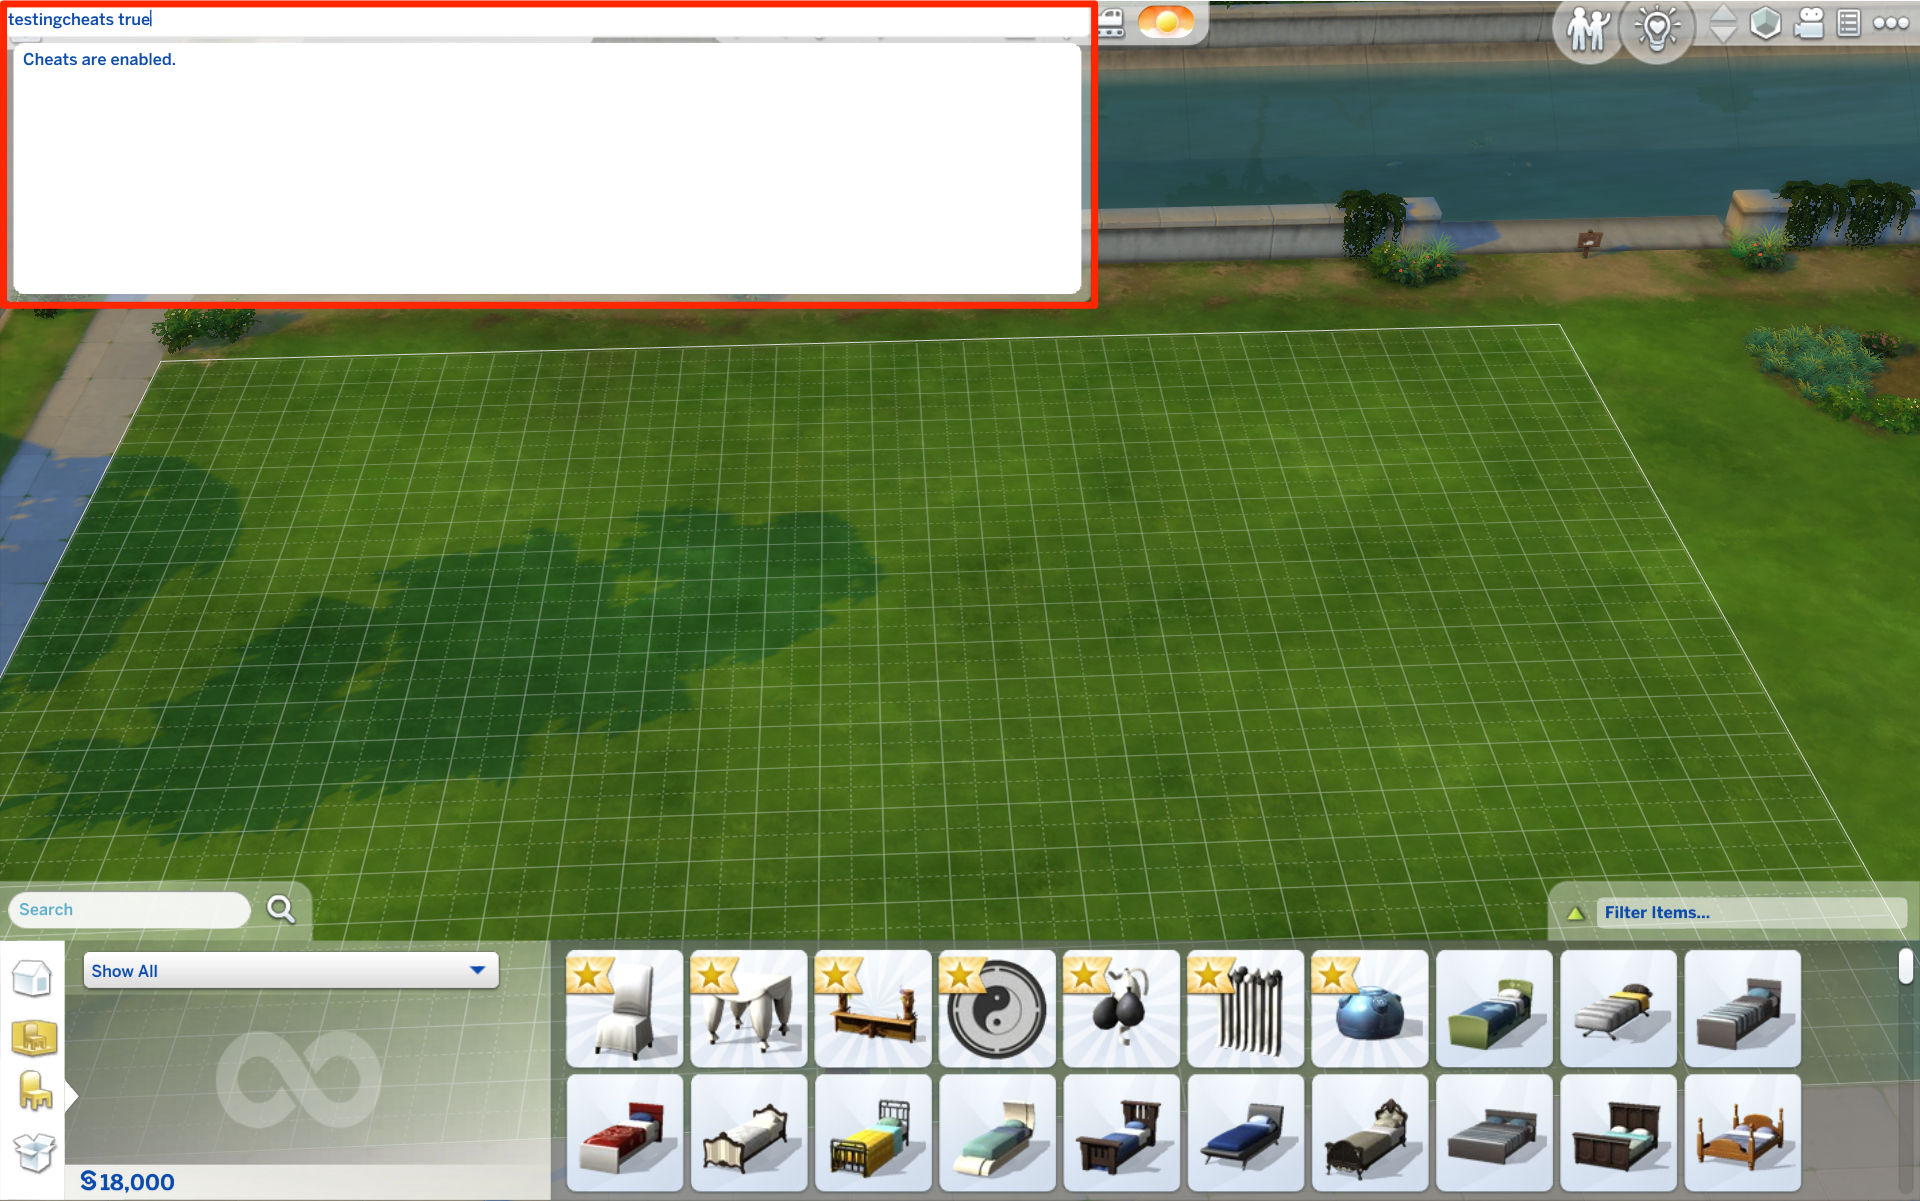 The cheats menu in The Sims 4.